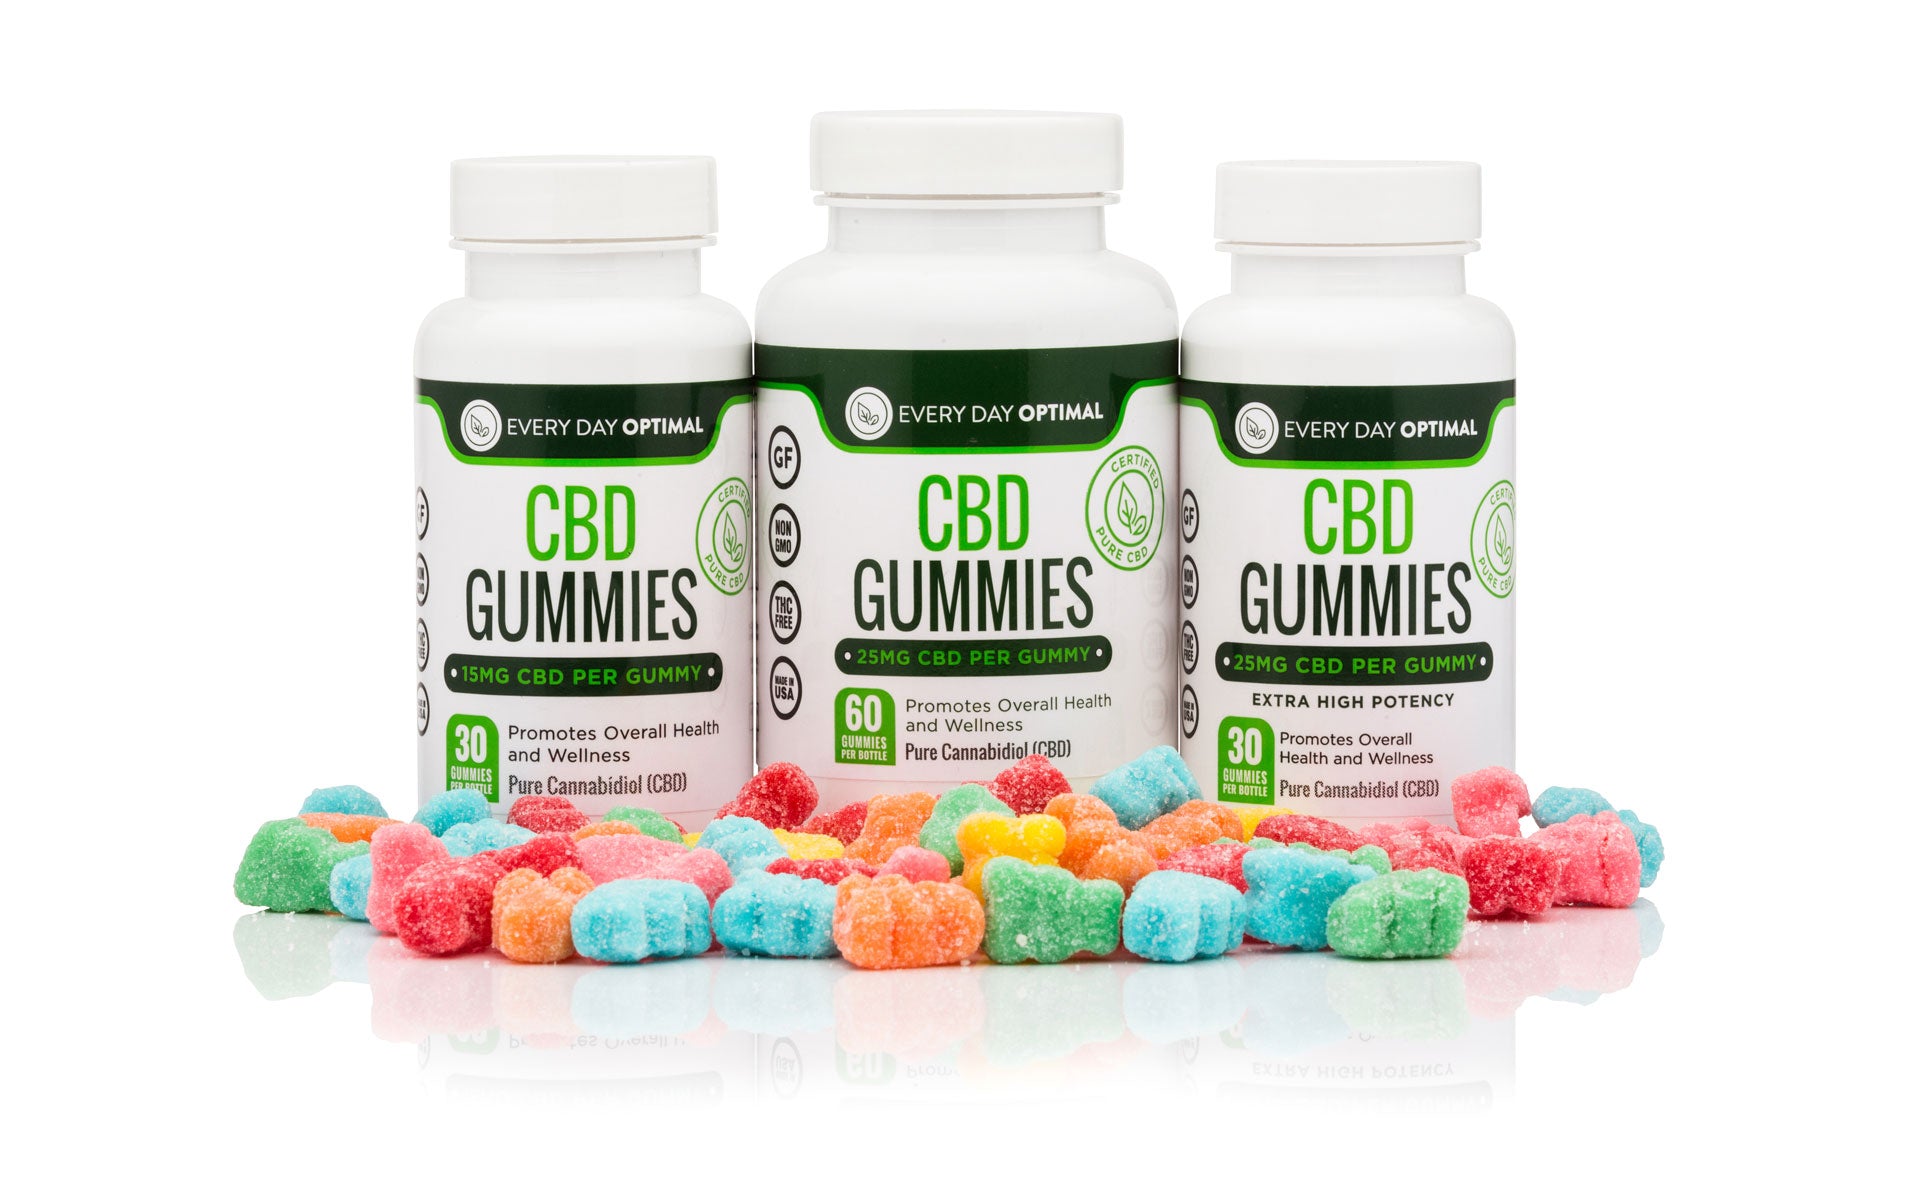 Why Runtz Gummies are the Cannabis Edibles for a Sweet and Potent Experience